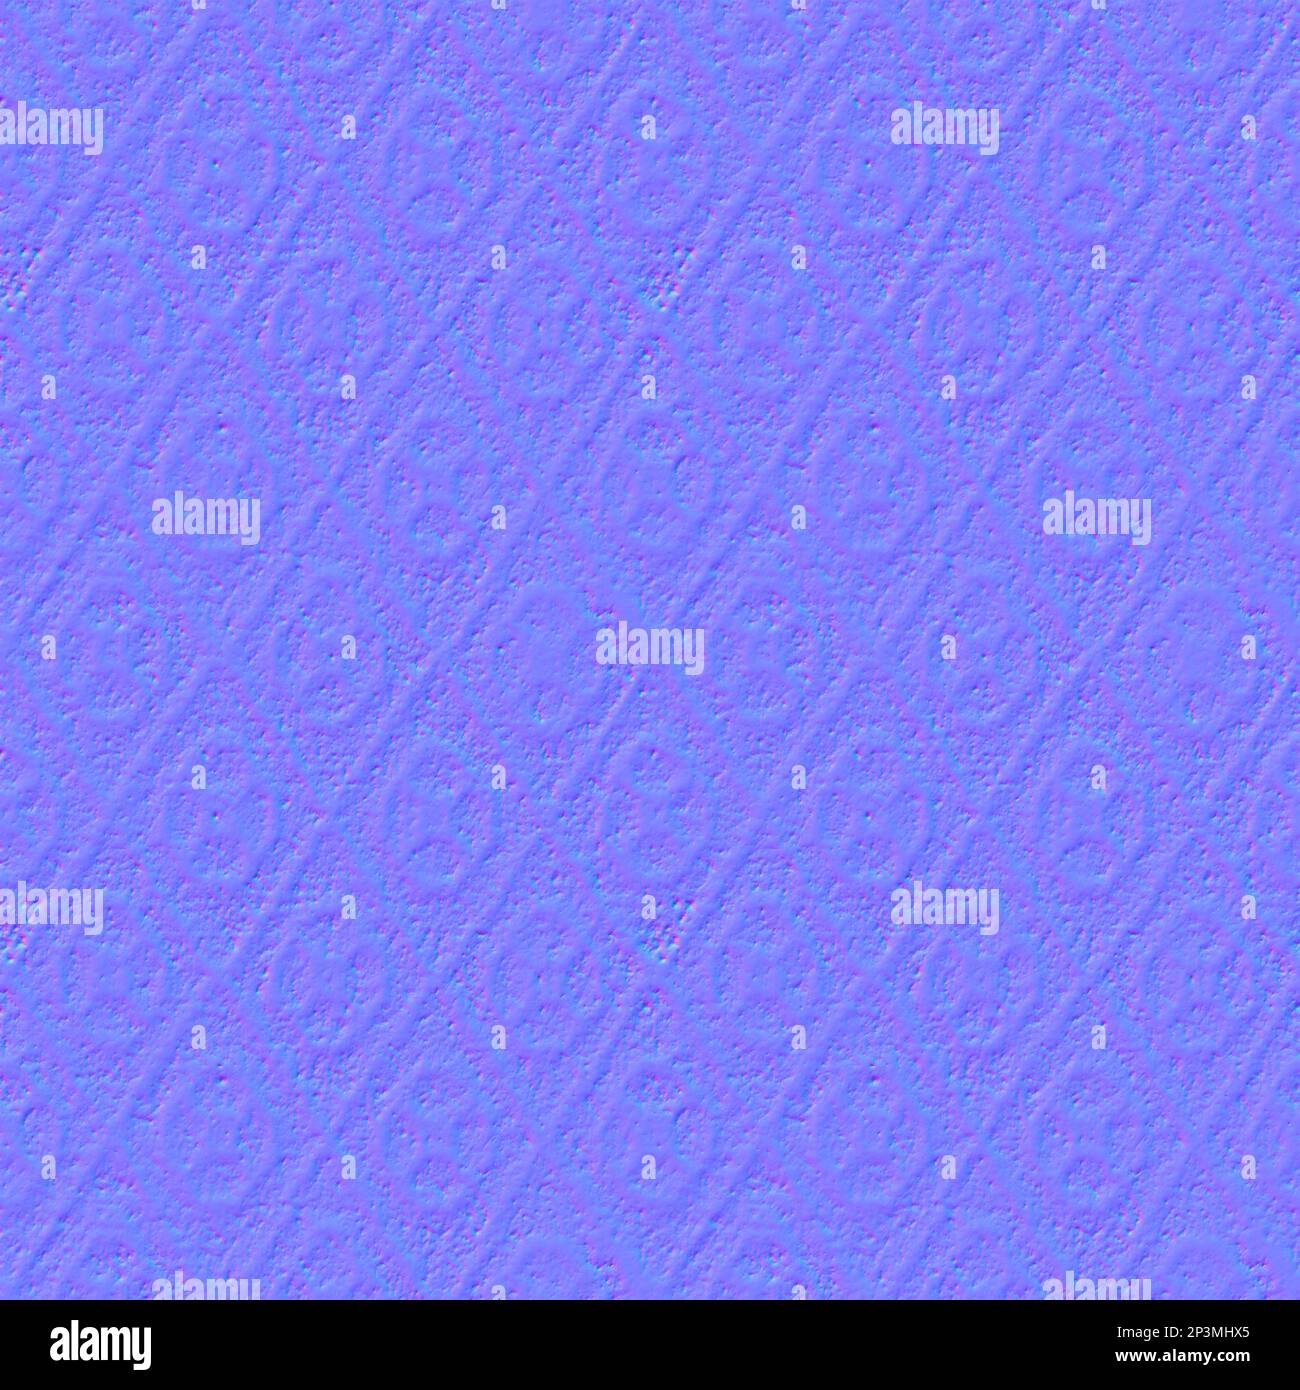 Normal Map Fabric Fabric Normal Mapping Stock Photo by ©FlyOfSwallow  606845398